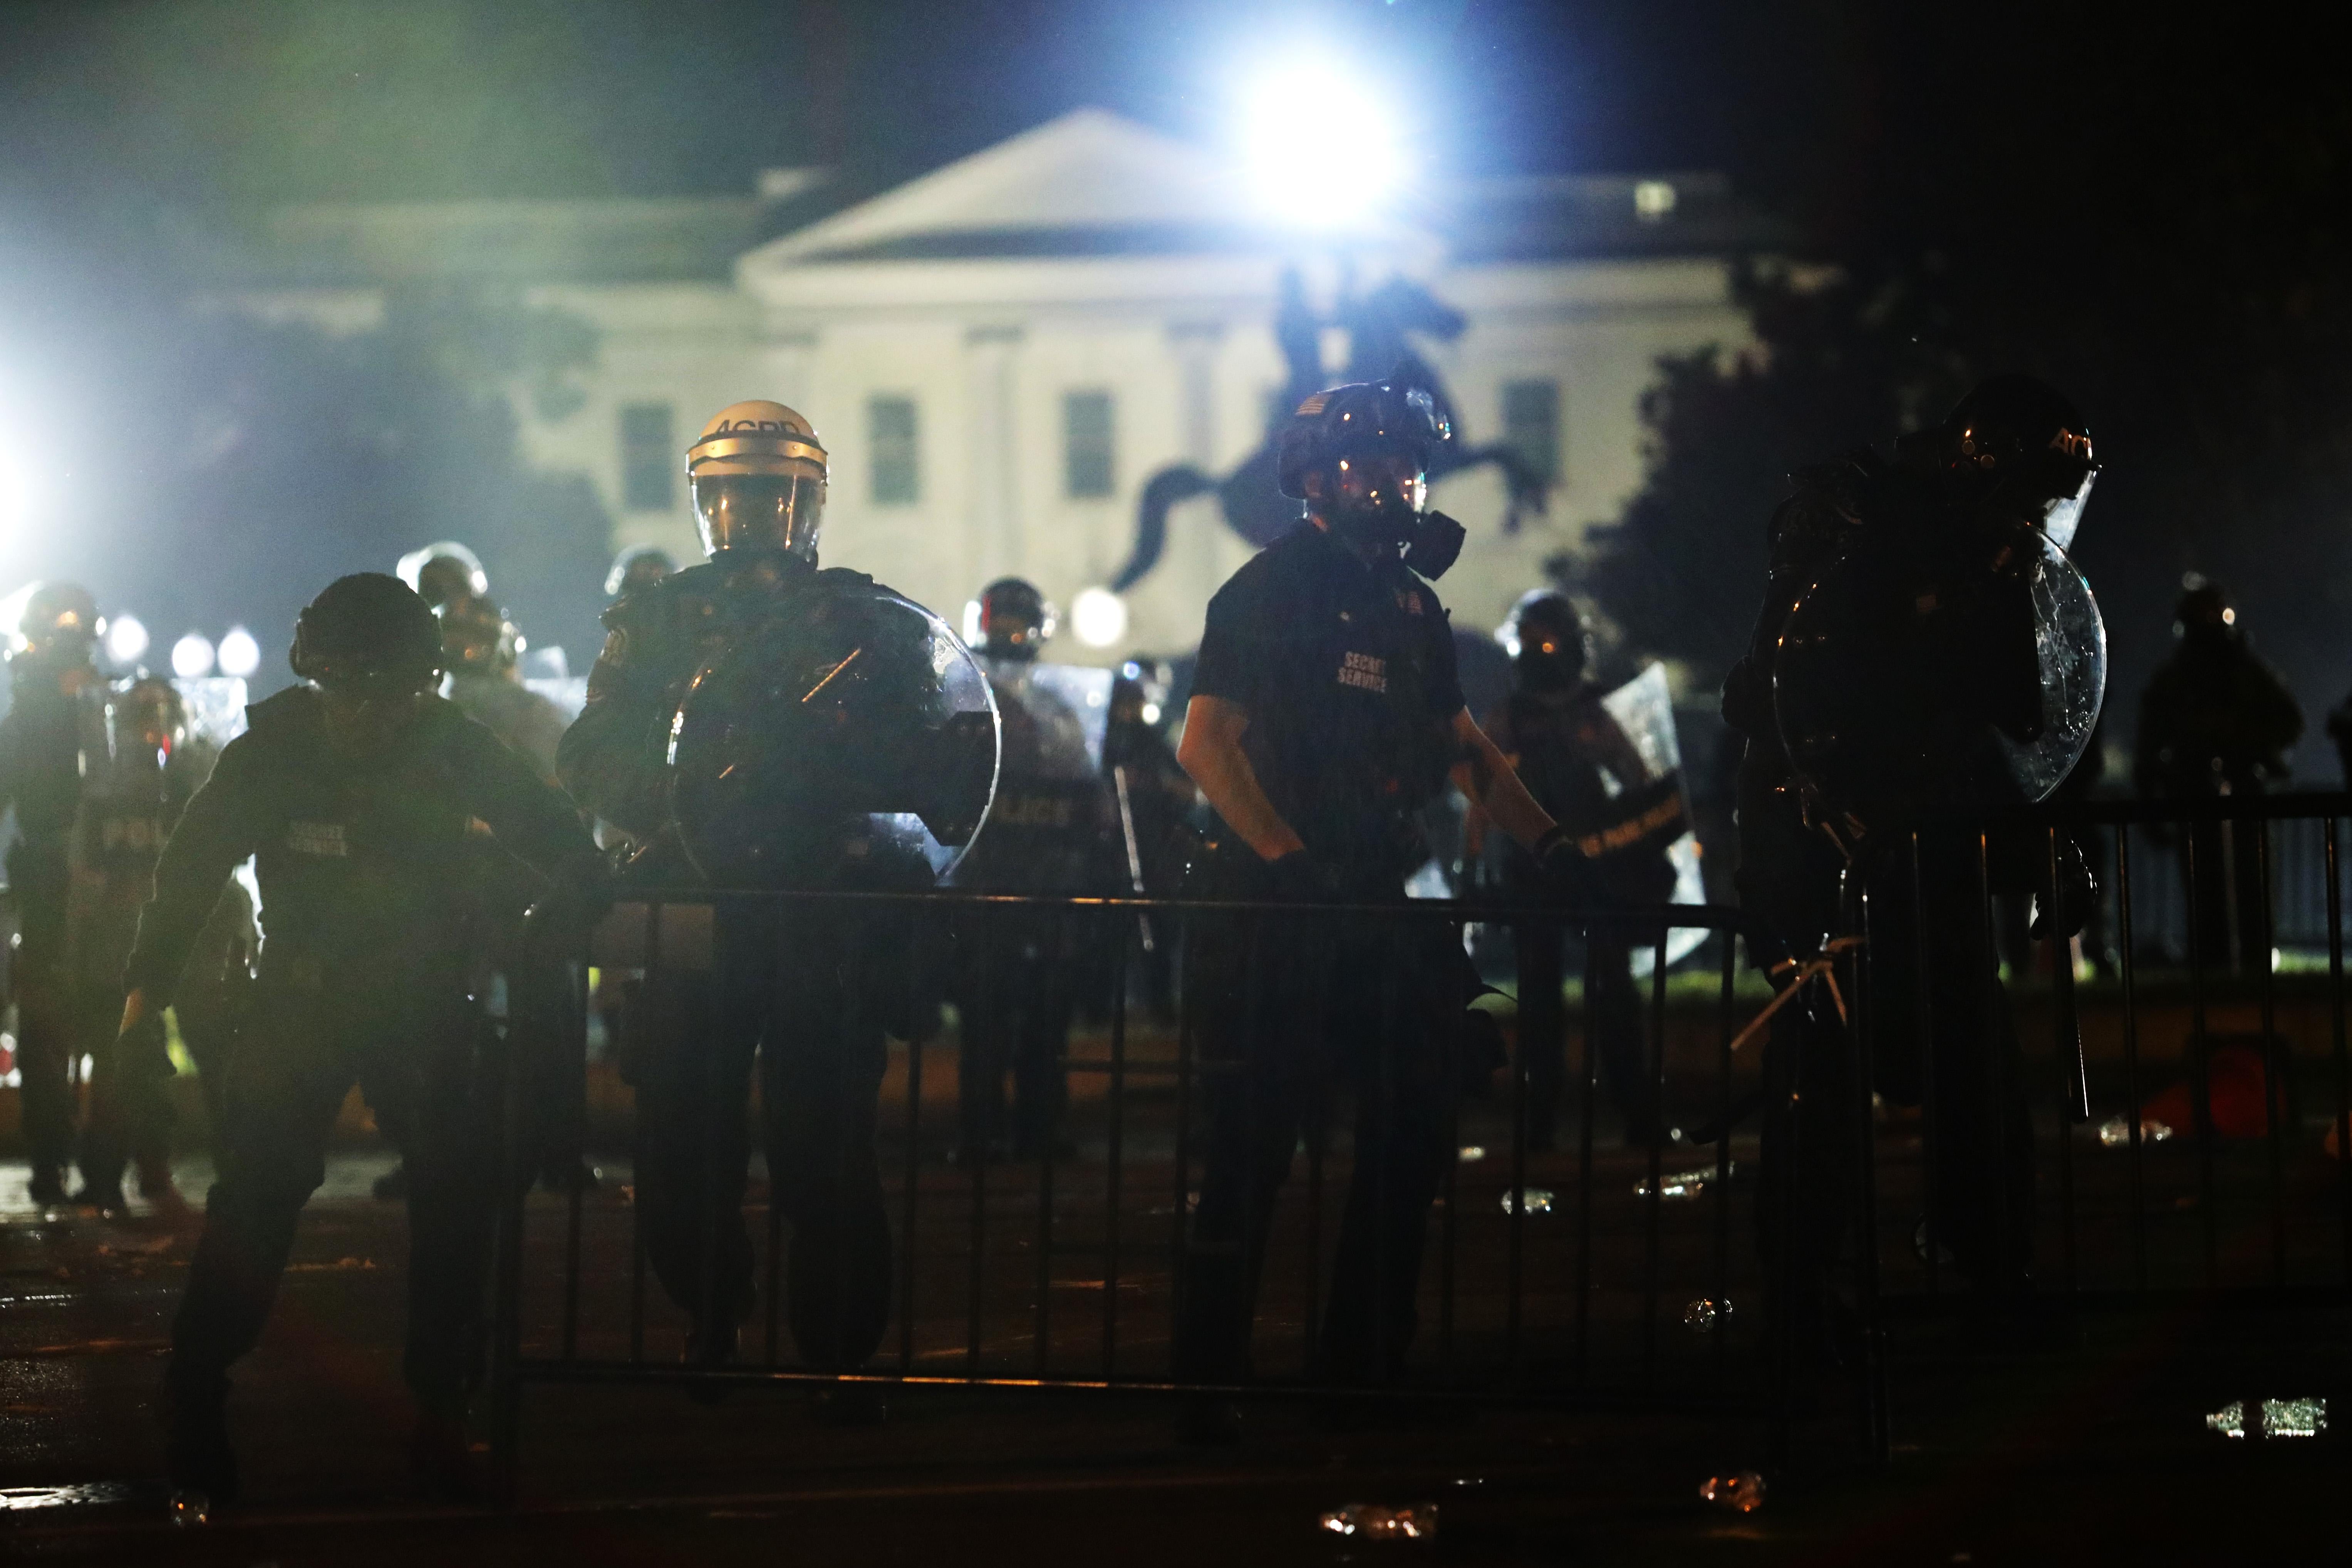 White House goes dark as D.C. protesters rage outside.